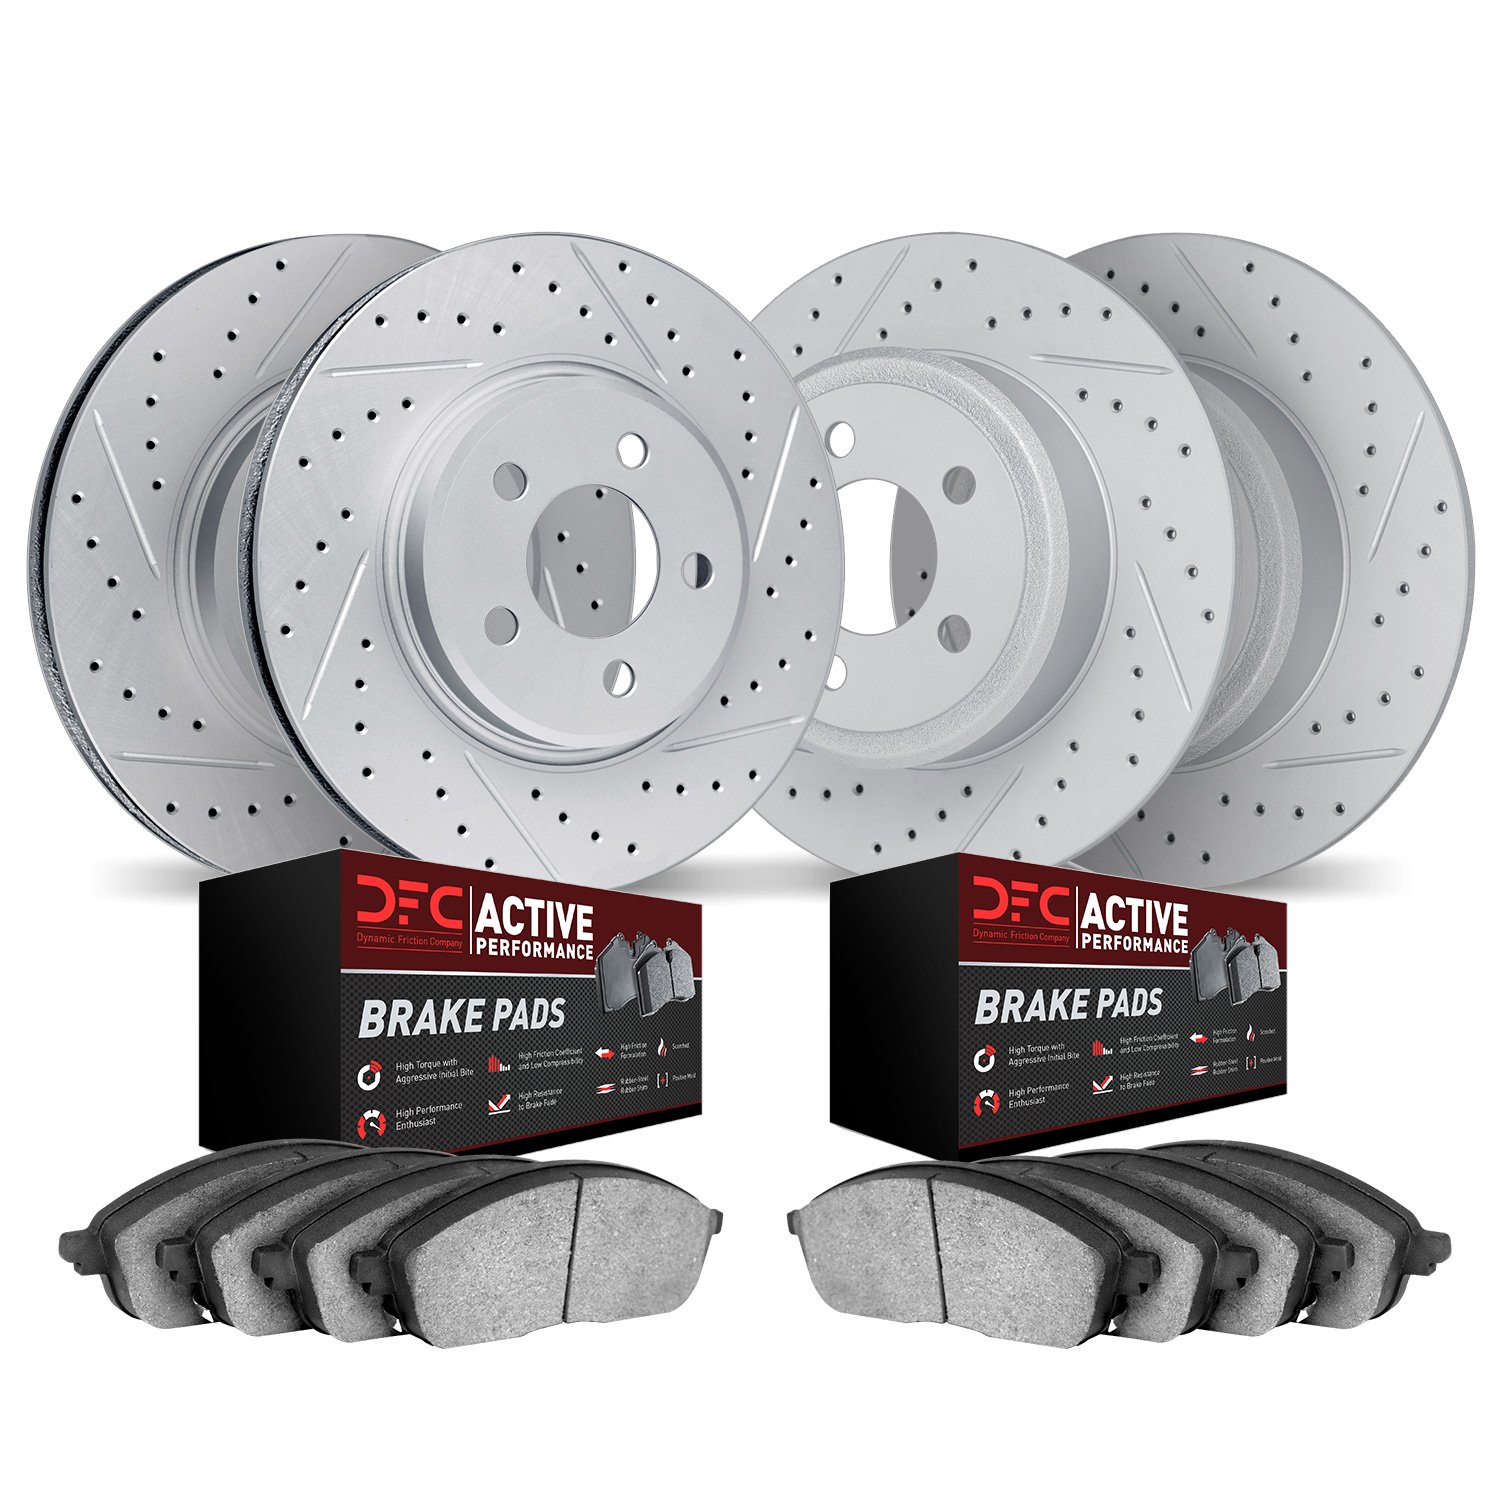 2704-76003 Geoperformance Drilled/Slotted Brake Rotors with Active Performance Pads Kit, 2000-2005 Lexus/Toyota/Scion, Position: